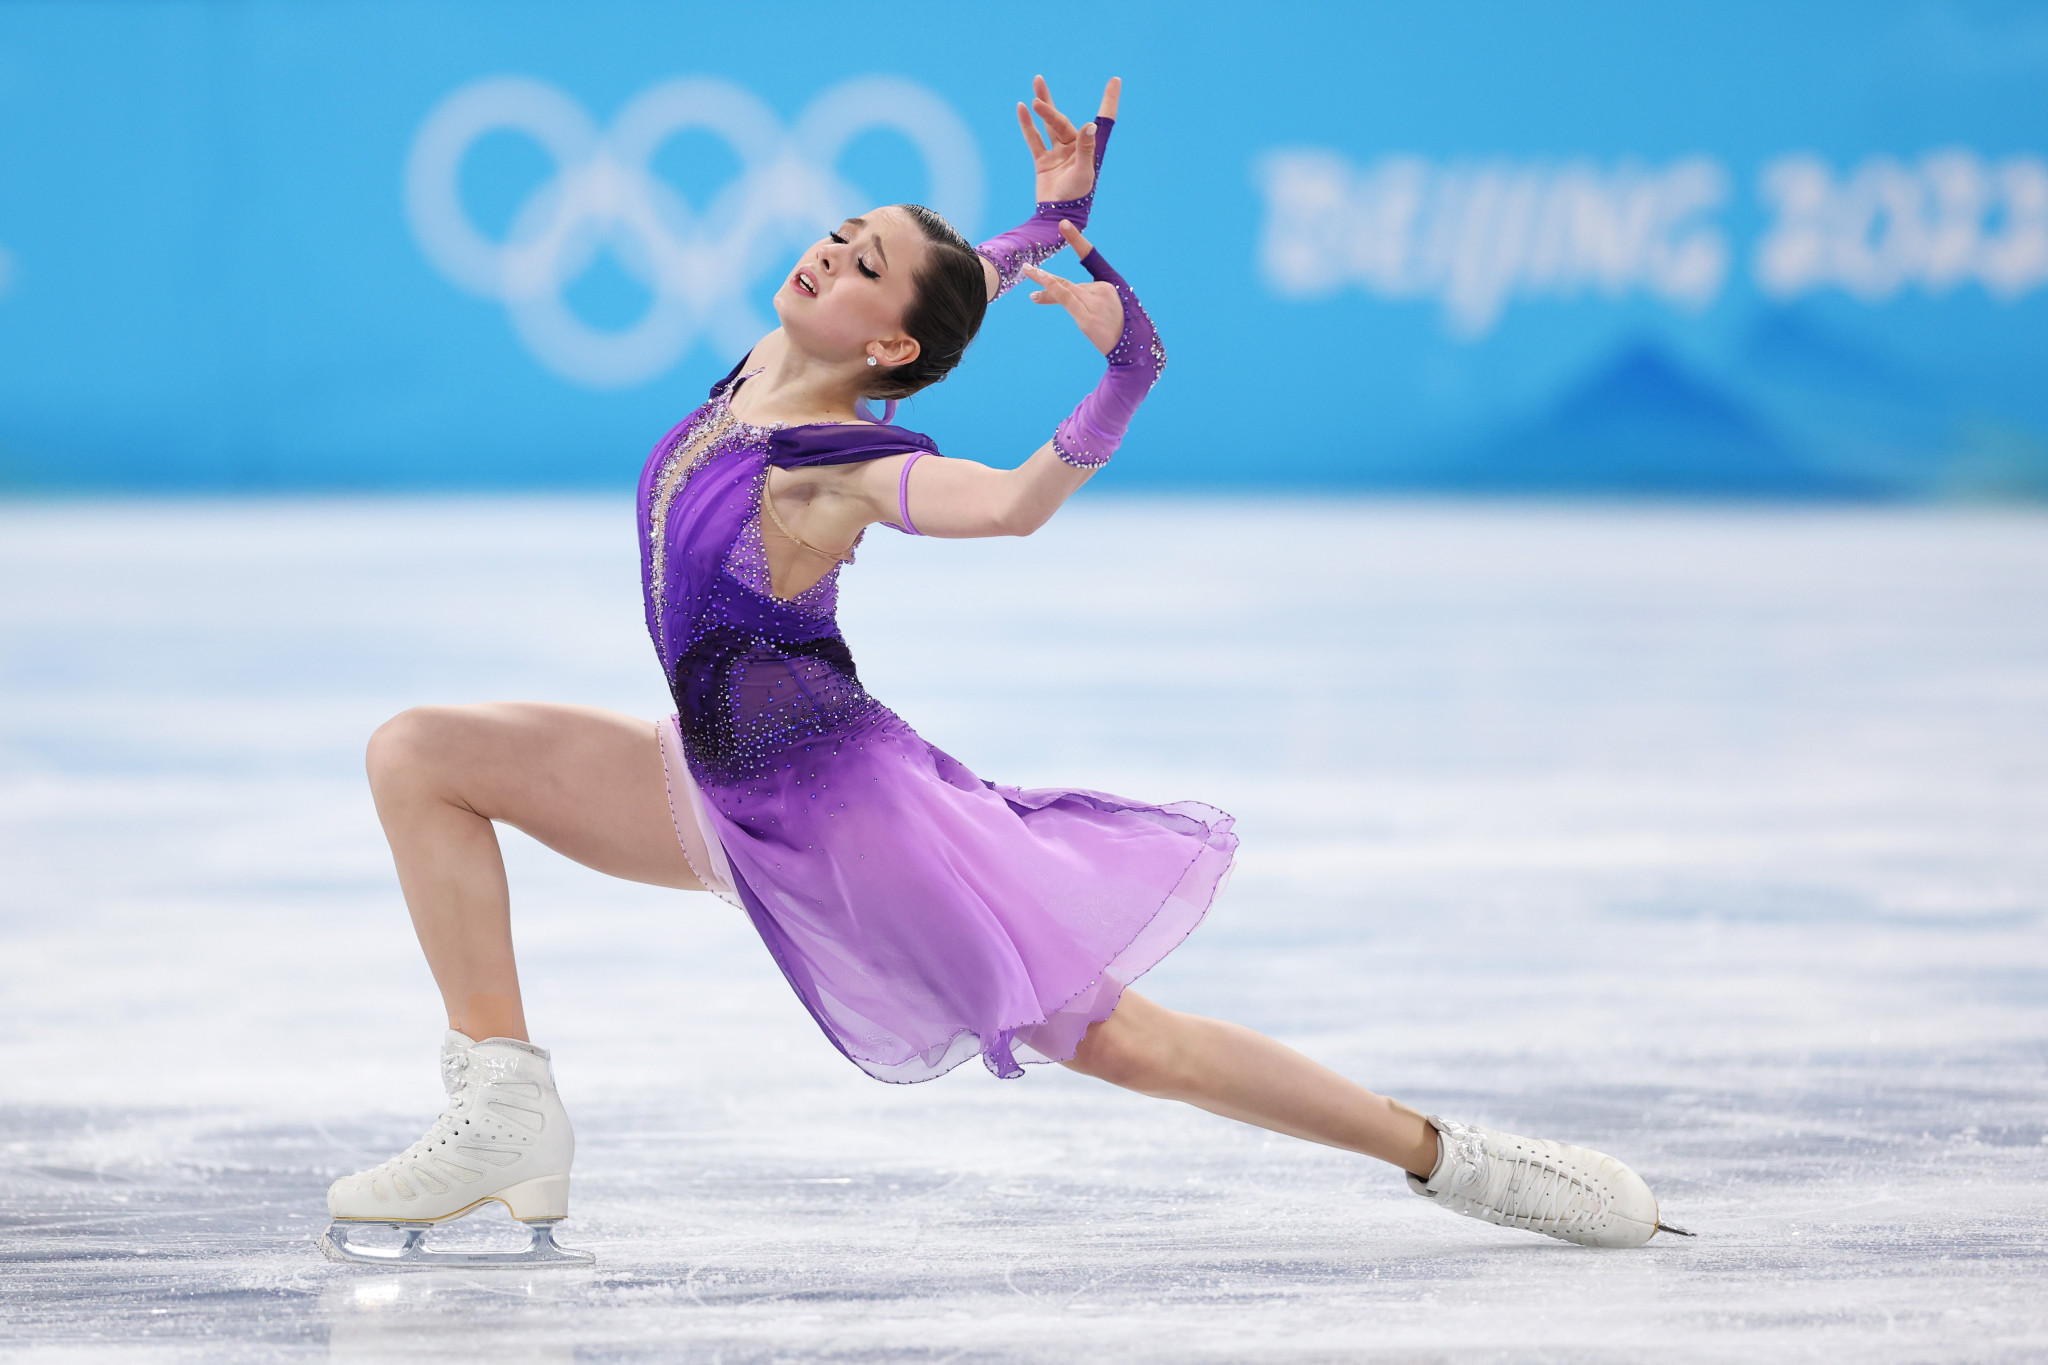 Kamila Valieva helped the ROC to team figure skating gold at Beijing 2022 ©Getty Images